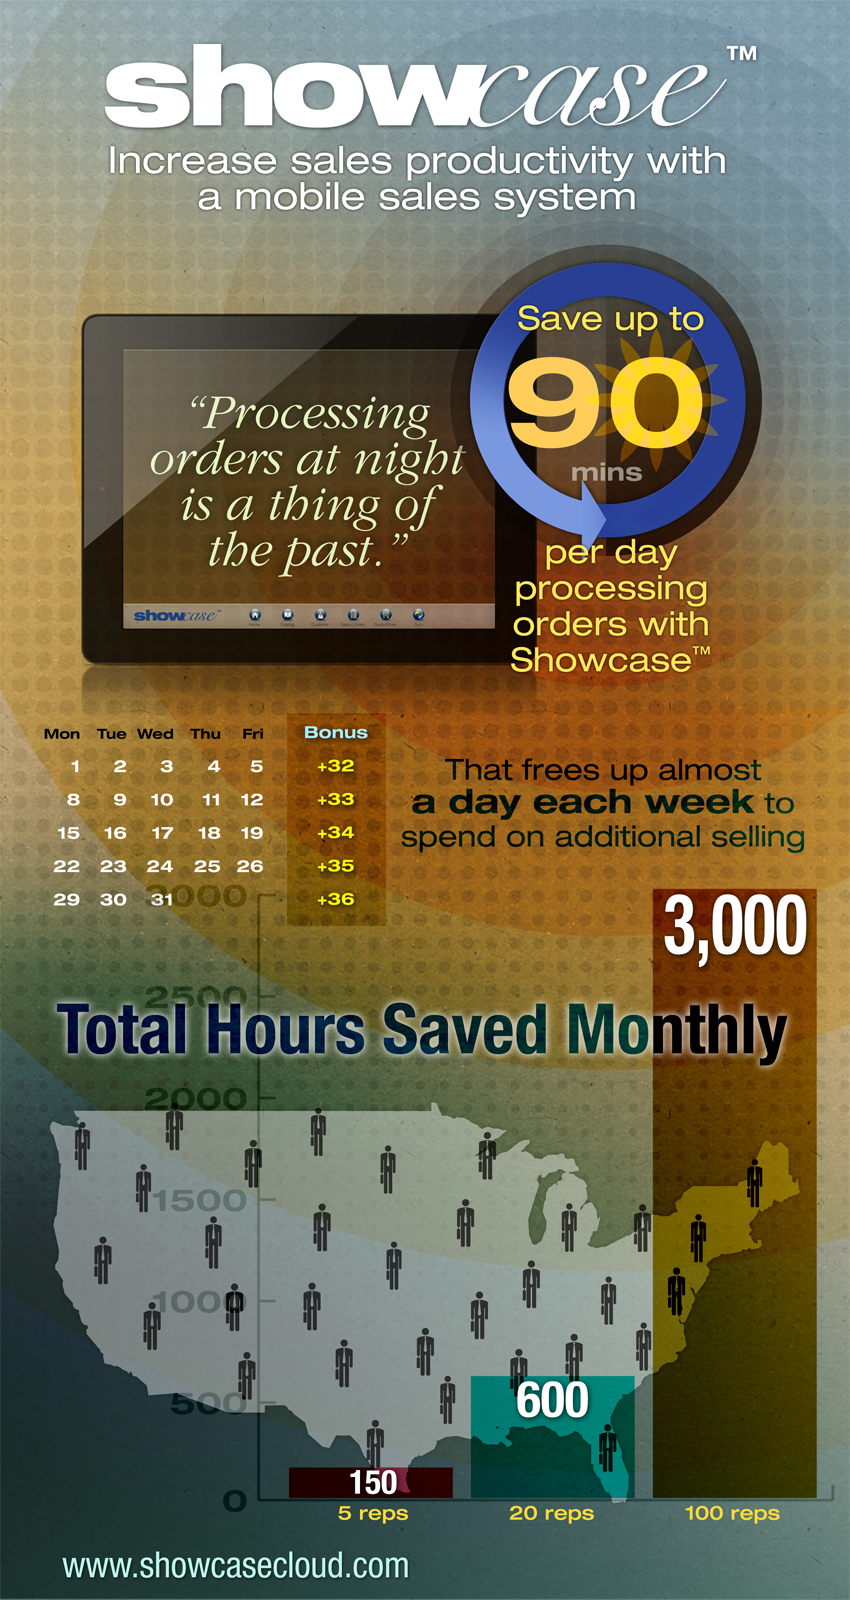 Logic-Solutions-Showcase-Mobile-Sales-System-App-infographic